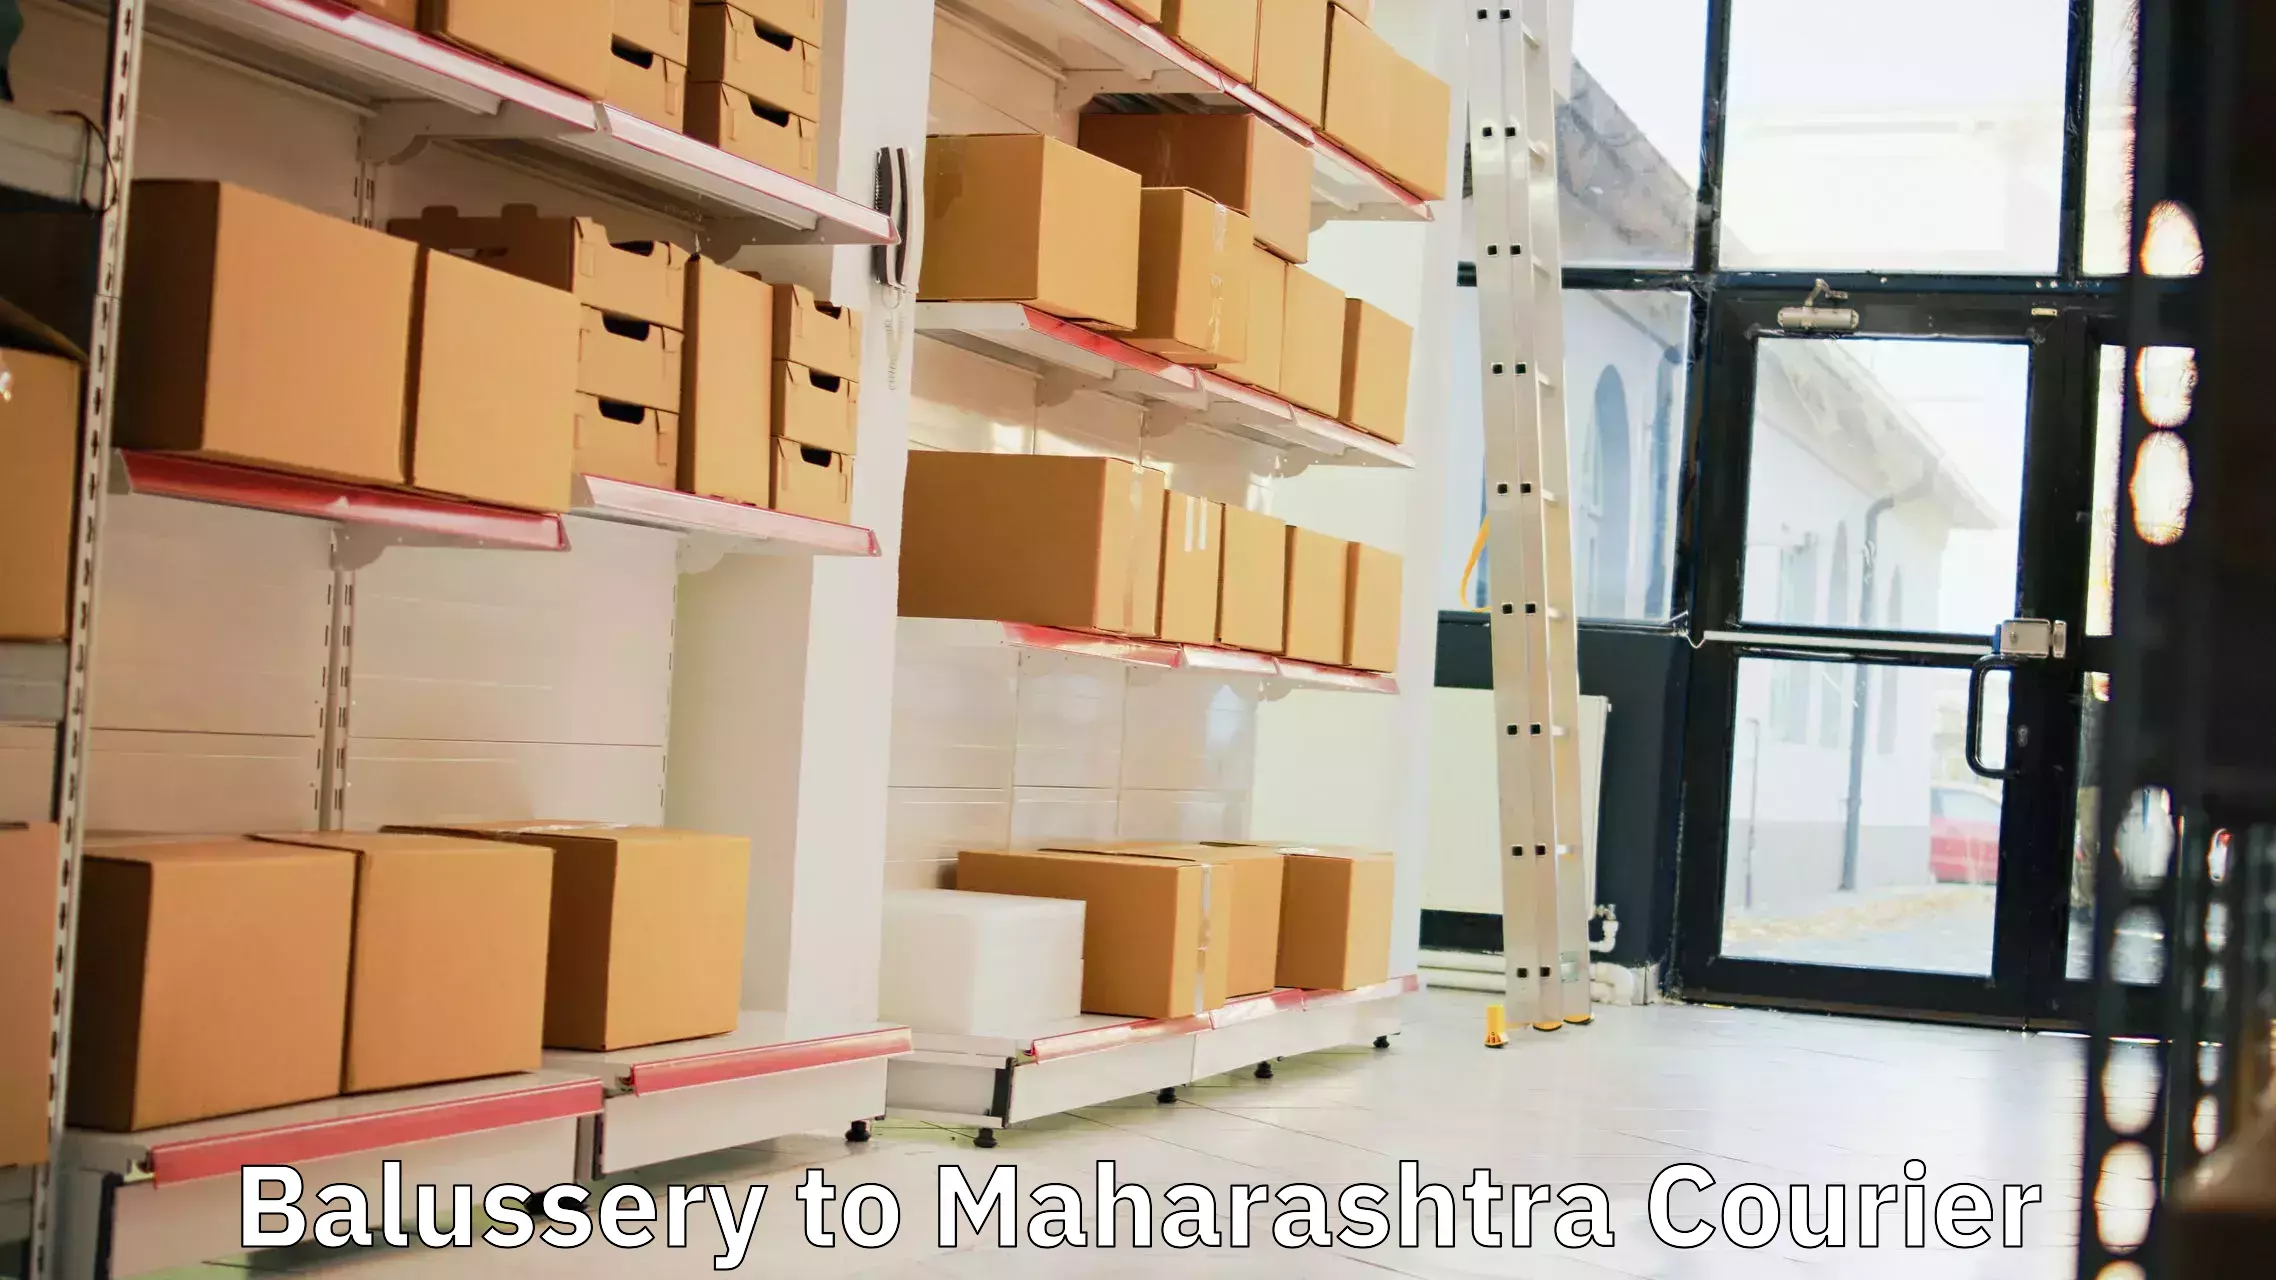 Expedited parcel delivery in Balussery to Maharashtra